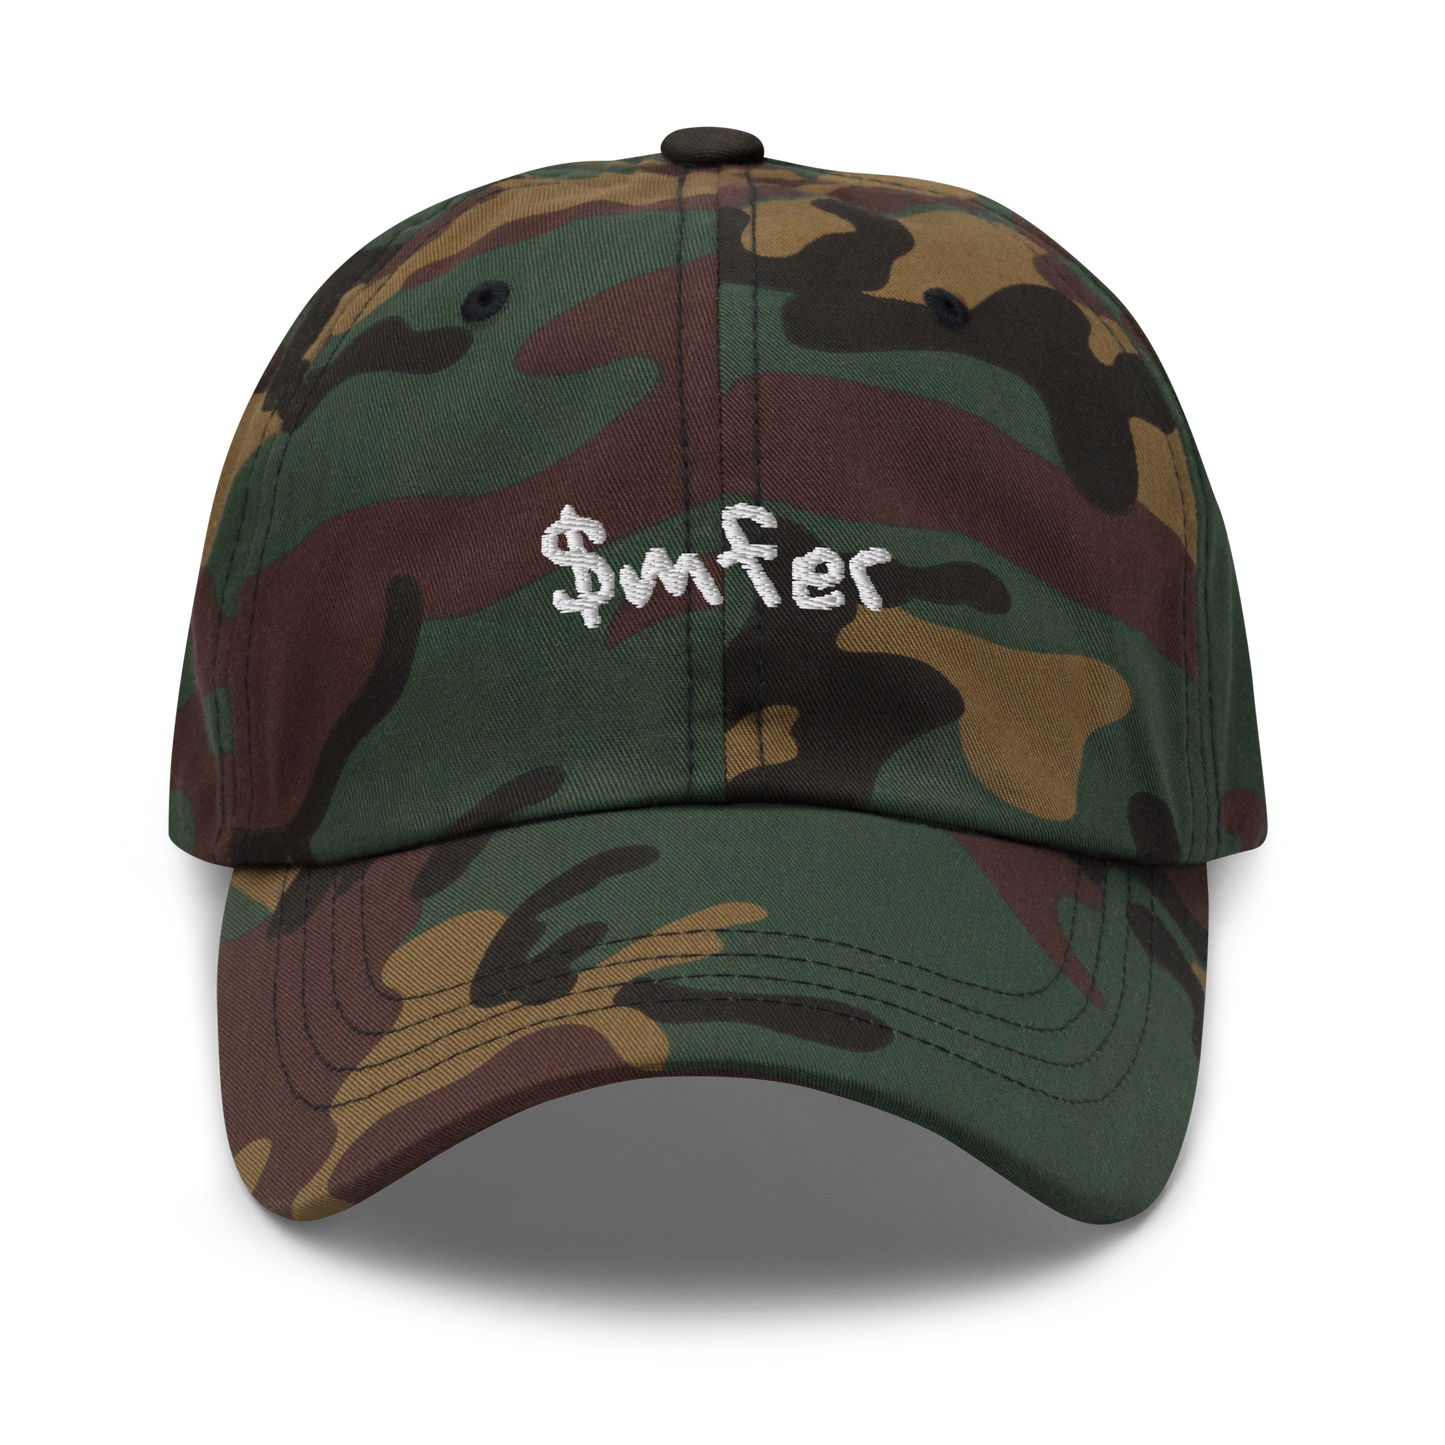 $mfer hat white text